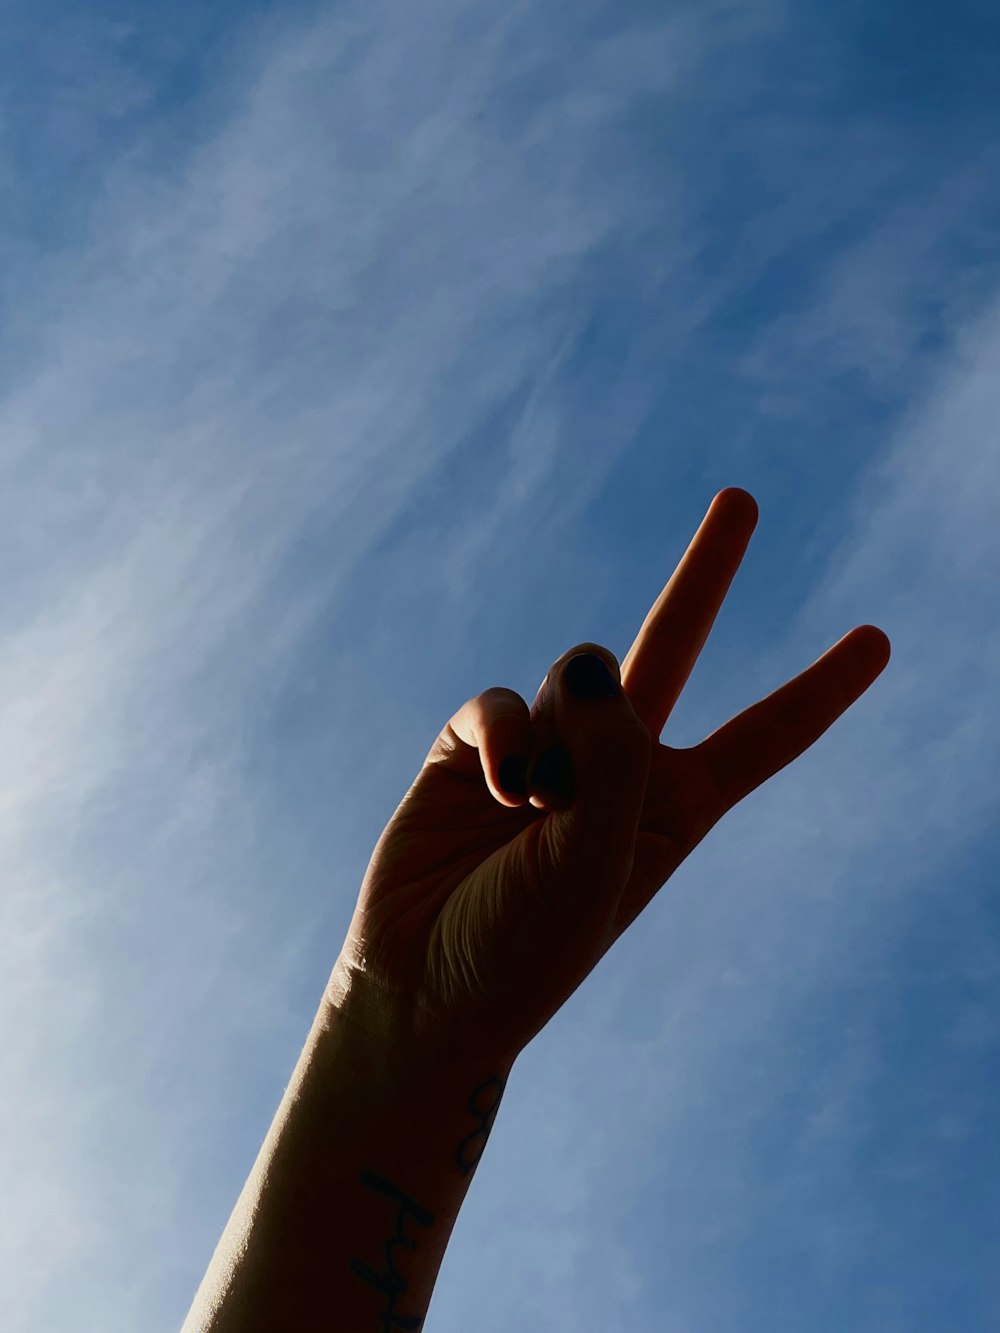 a hand holding up a peace sign in the air